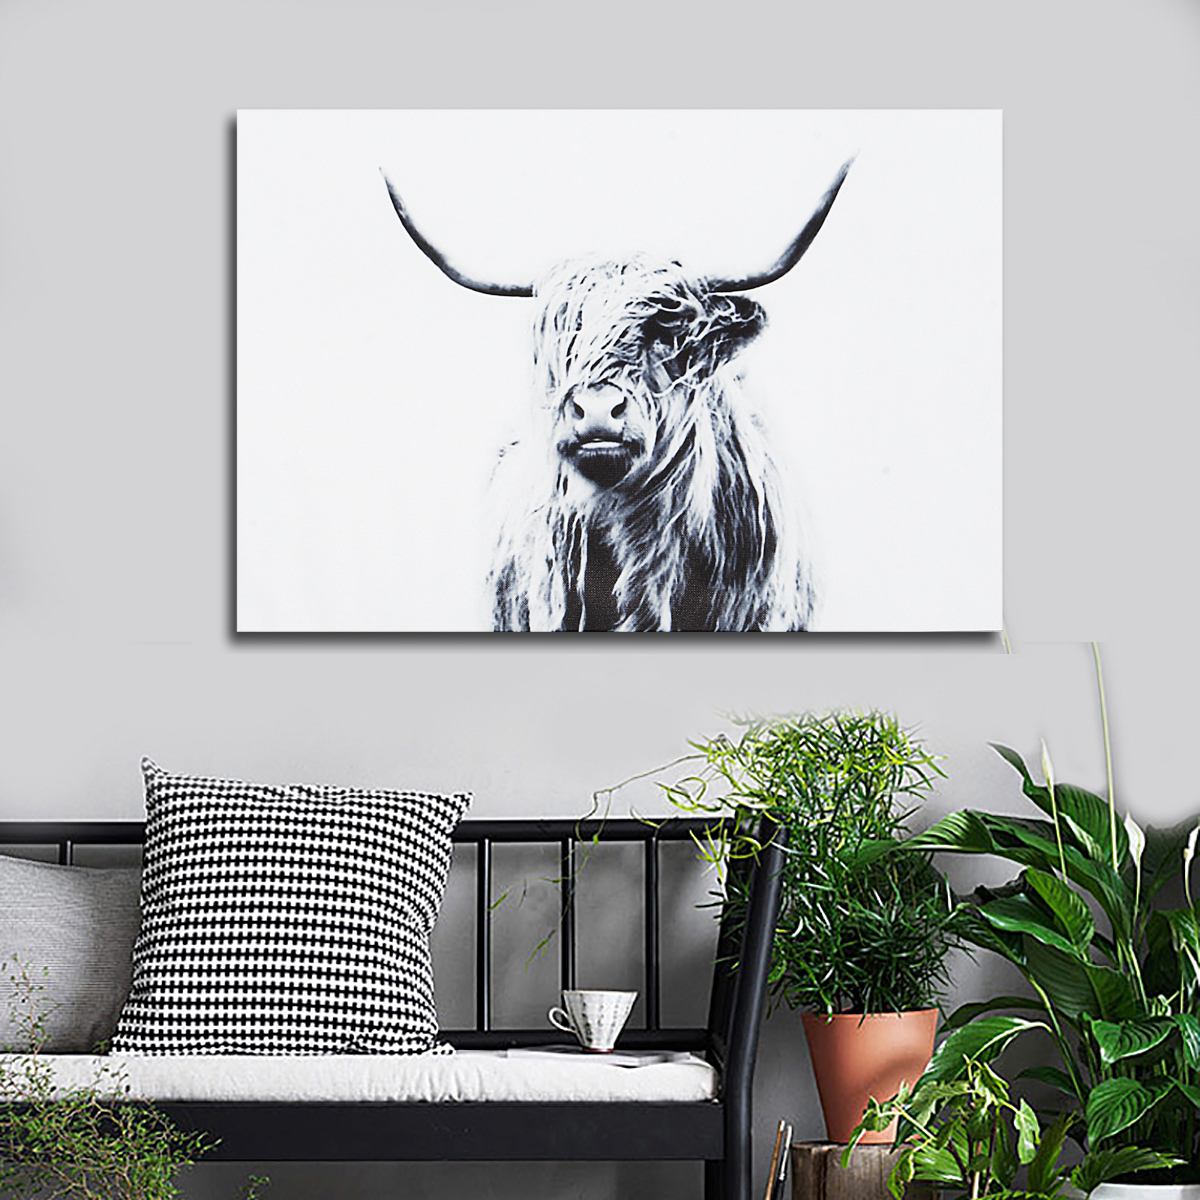 1-Piece-Highland-Cattle-Canvas-Painting-Wall-Decorative-Print-Art-Pictures-Frameless-Wall-Hanging-De-1733254-3